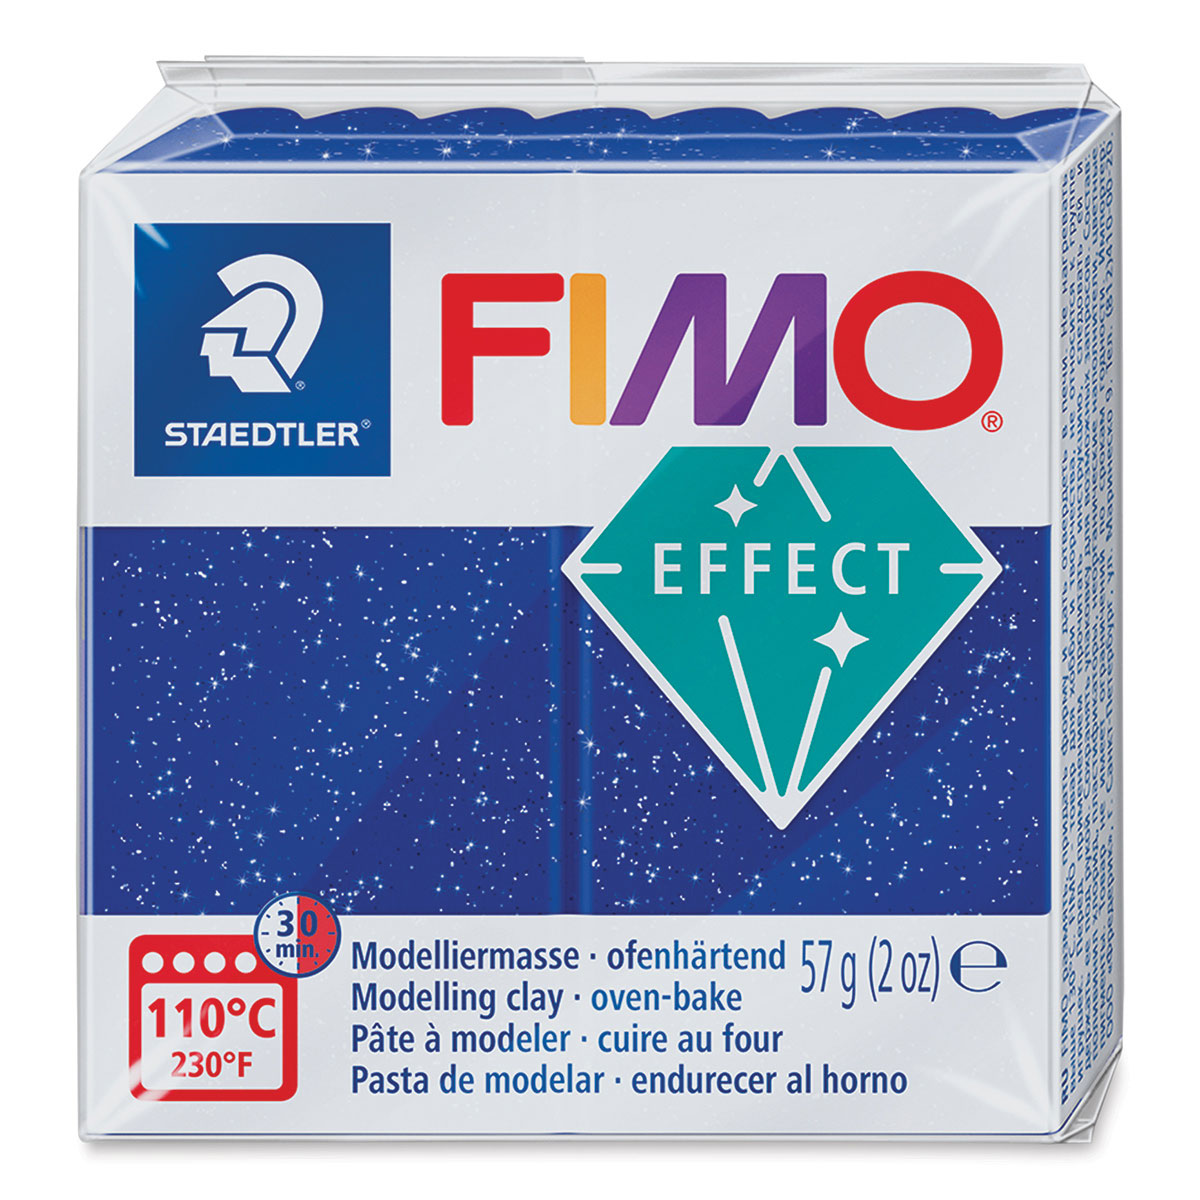 08 FIMO Effect Effect Polymer Modelling Moulding Clay Block Colour 56g STAEDTLER FIMO Effect Mother Of Pearl Pack Of 5 